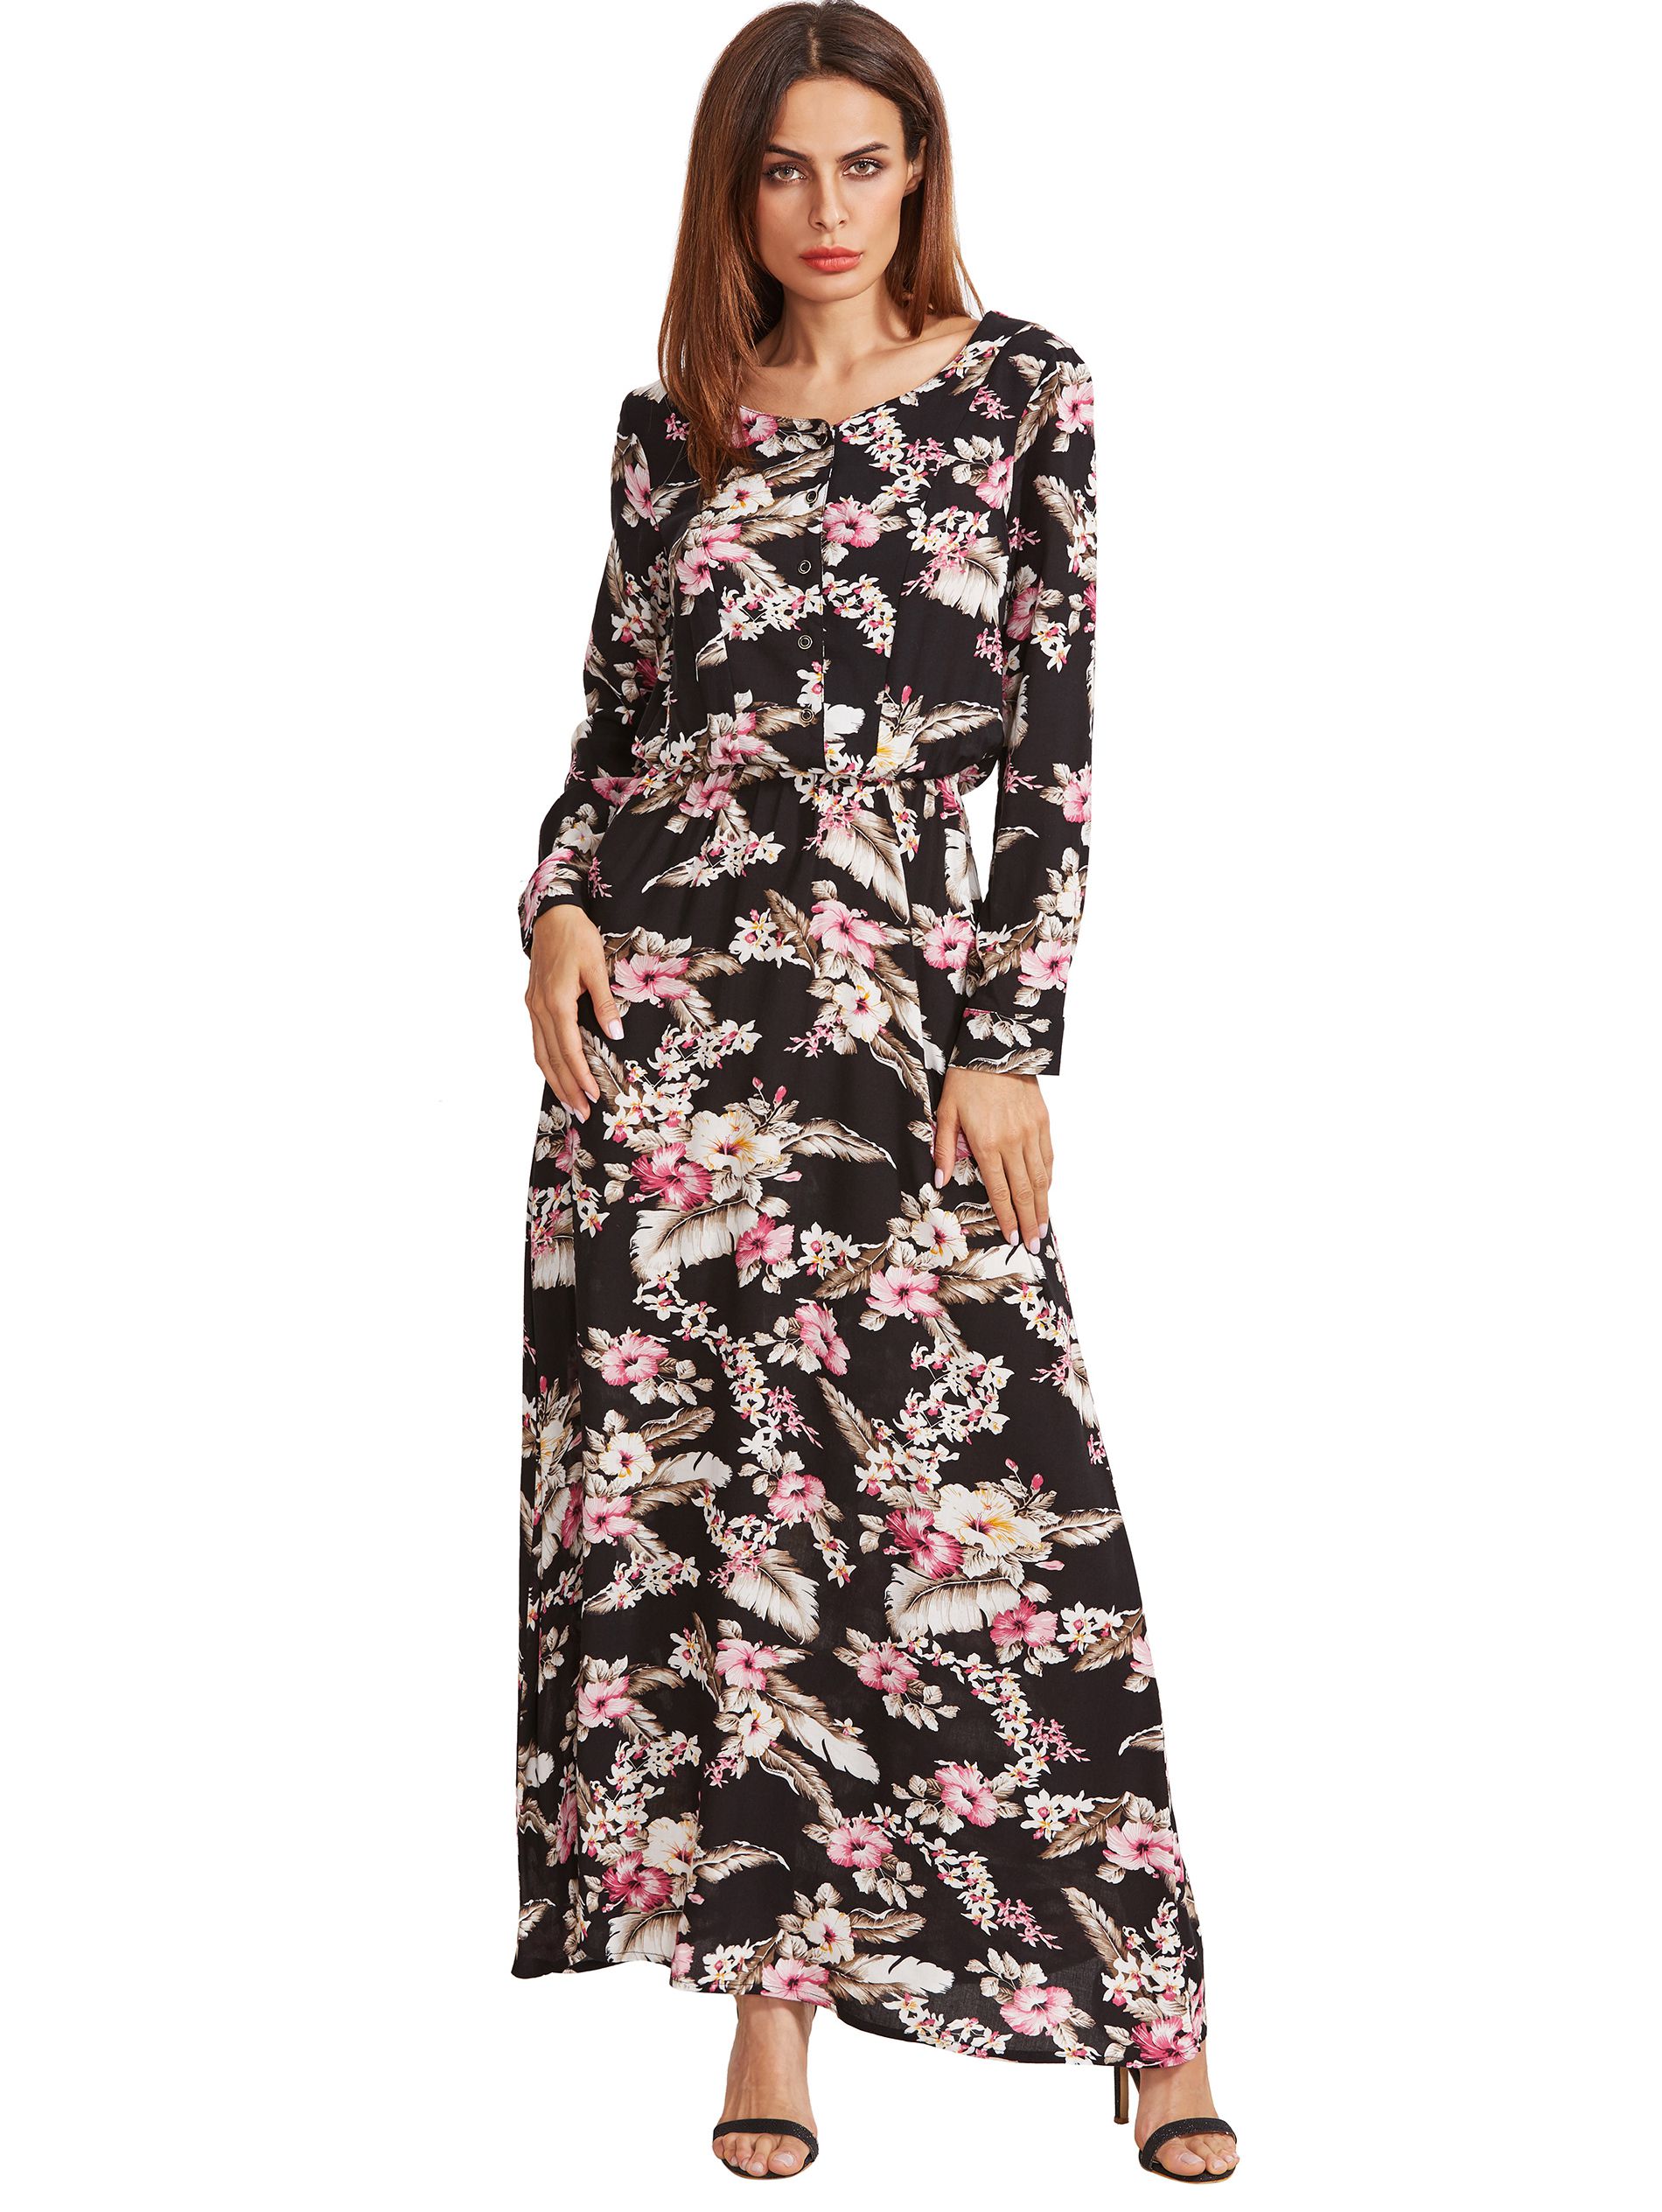 Black Blossom Print Buttoned Front Dress